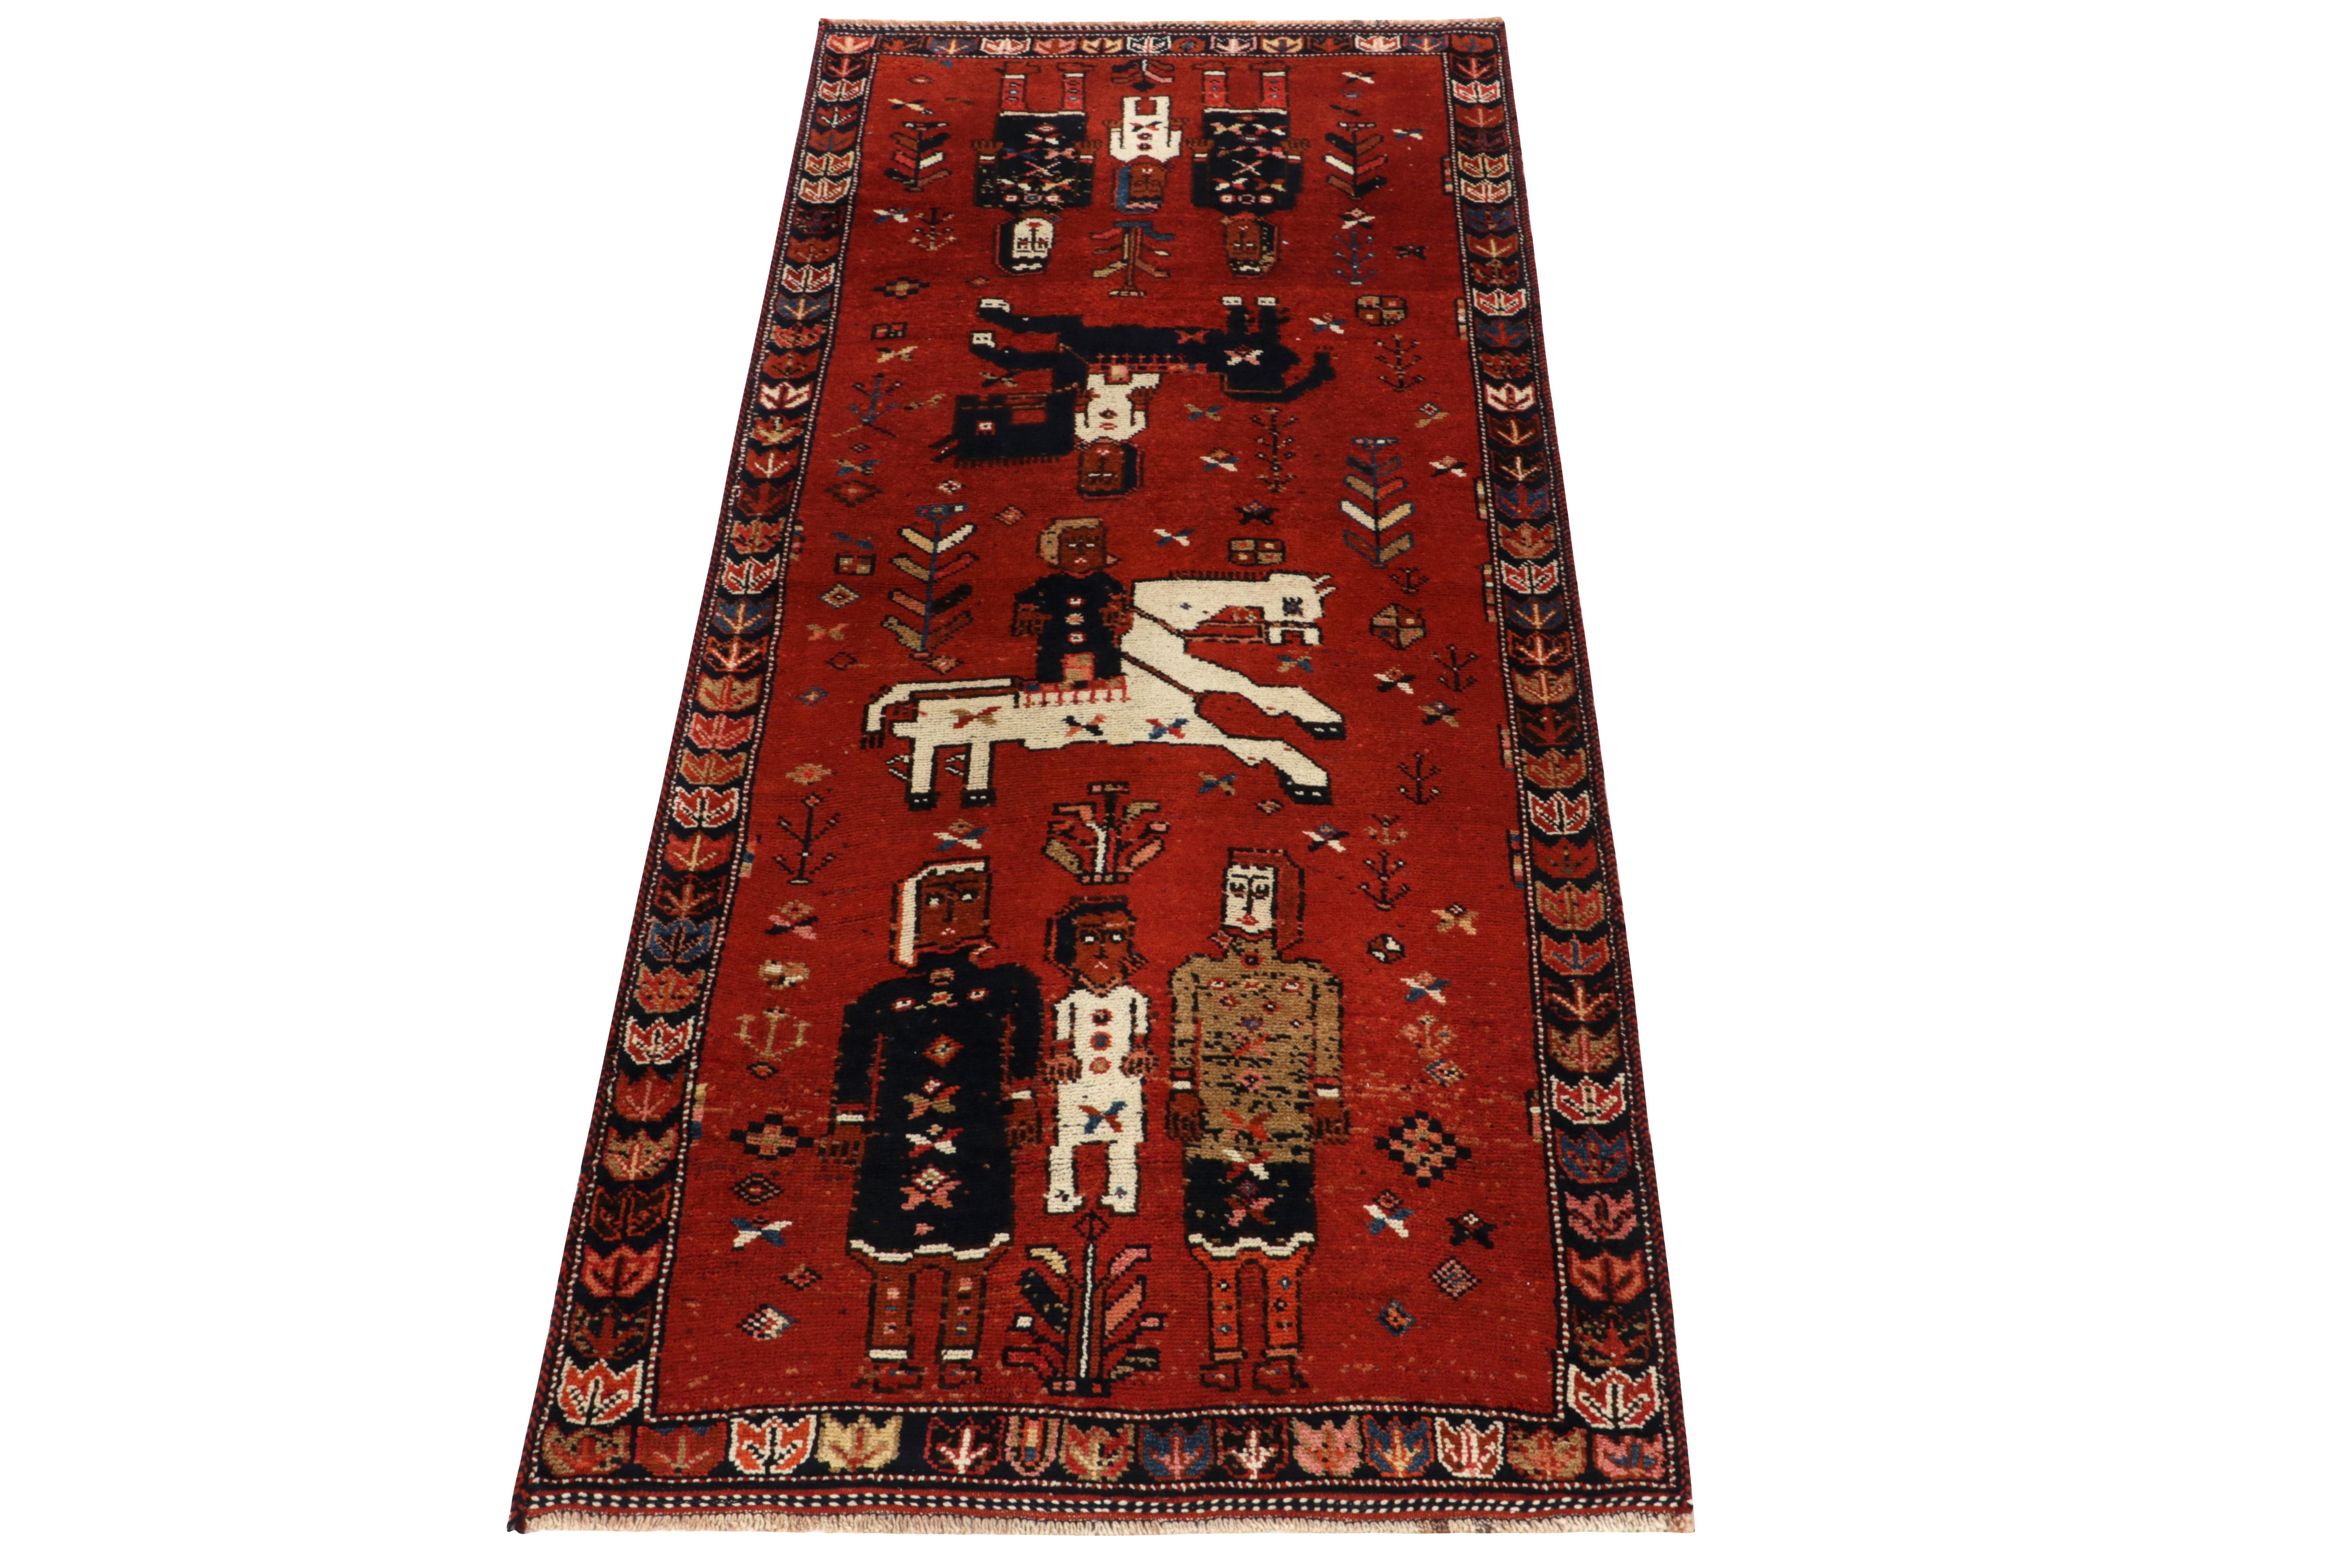 Hand-knotted in wool, a 4x10 rug from Rug & Kilim’s newly unveiled curation of incredibly rare tribal selections. Originating from Turkey circa 1950-1960, a profoundly uncommon representation of pictorial folk art from this period and style.

The